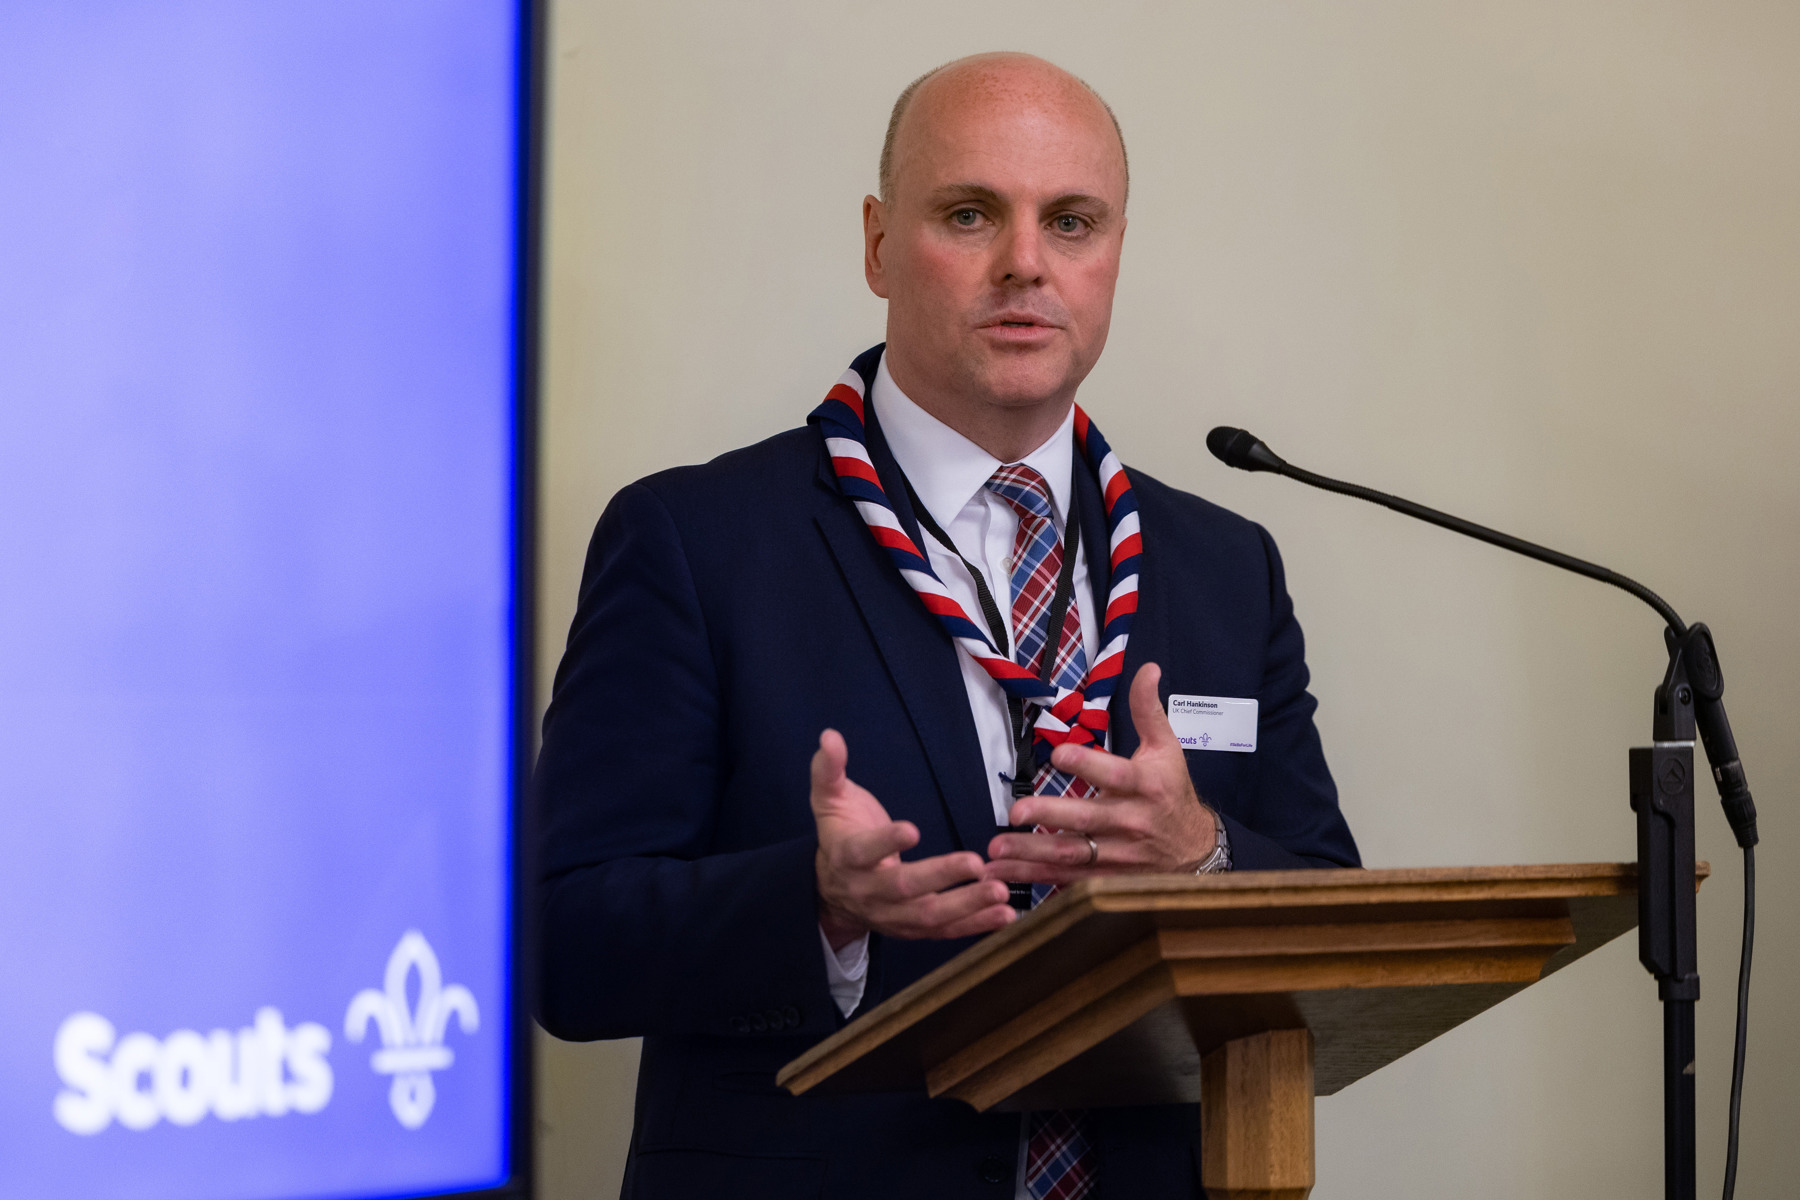 UK Chief Commissioner Carl Hankinson is wearing a suit and necker as he stands in front of a microphone to present at Parliament. In the background to the left is a purple screen with a white Scouts logo on.